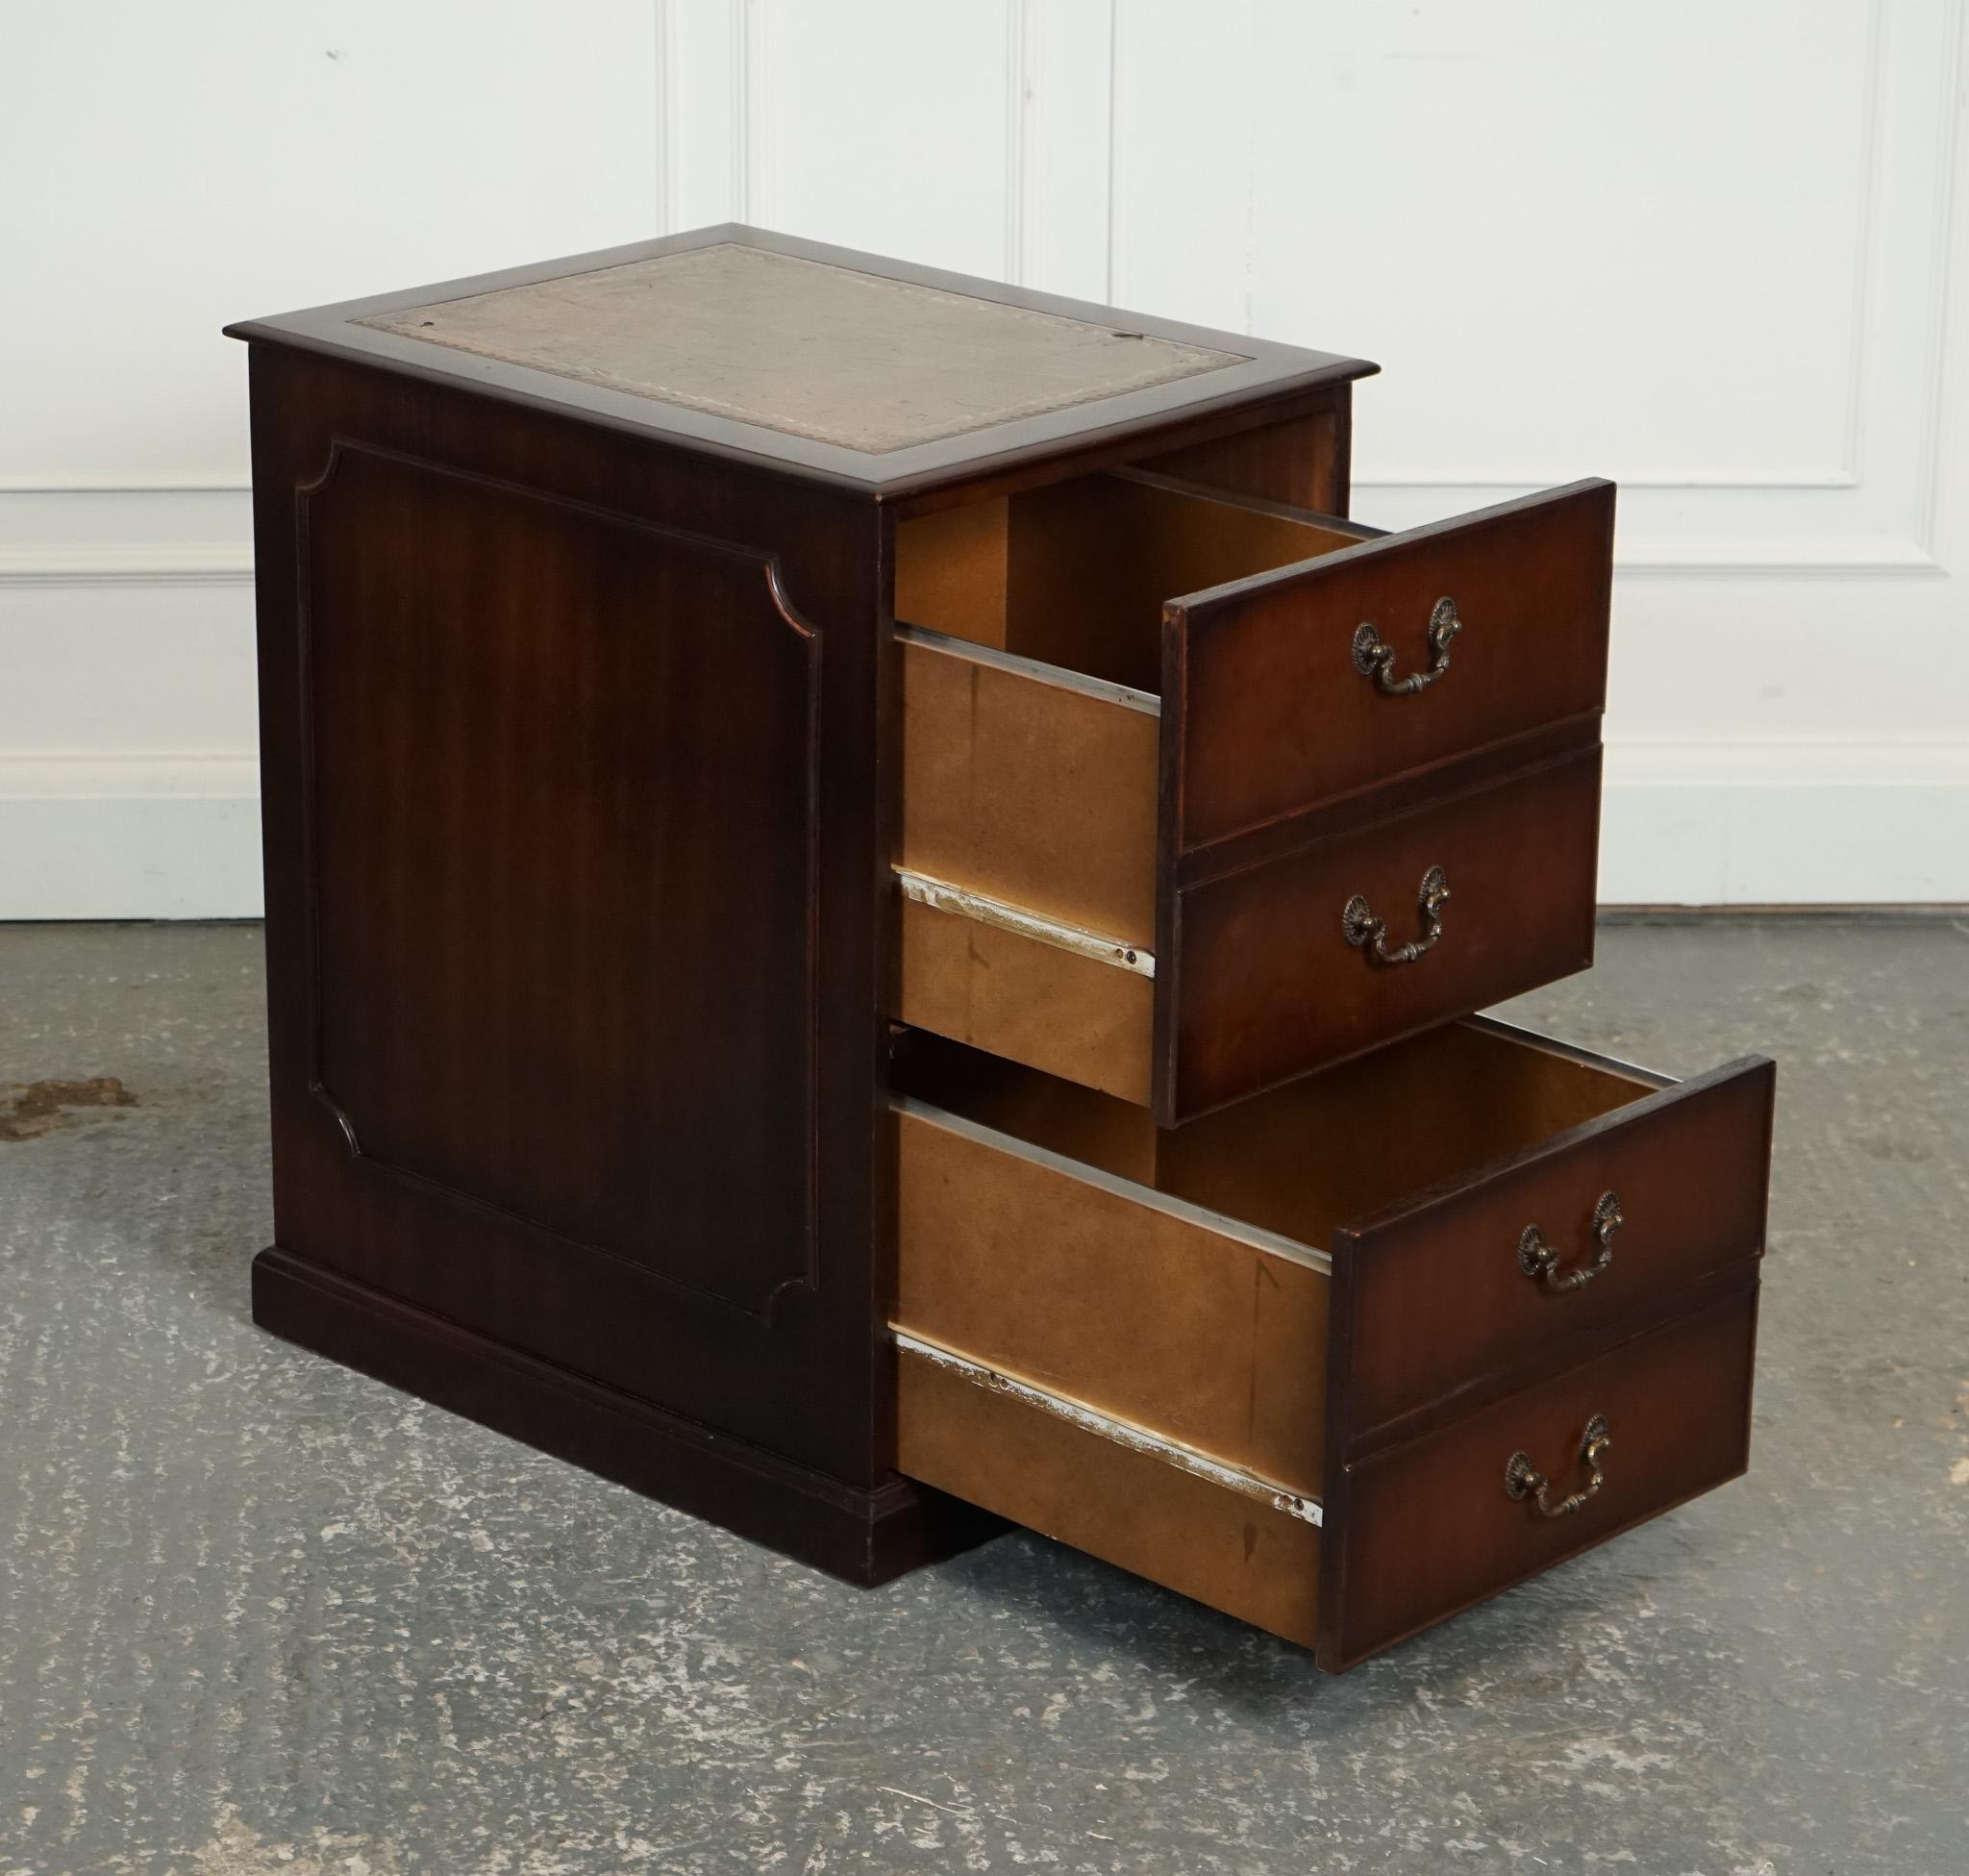 
We are delighted to offer for sale this Lovely Vintage Gold Embossed Brown Leather Top Filing Desk.

The leather top has some wear, please see this on the pictures.

A vintage mahogany gold embossed brown leather top filling cabinet is a classic